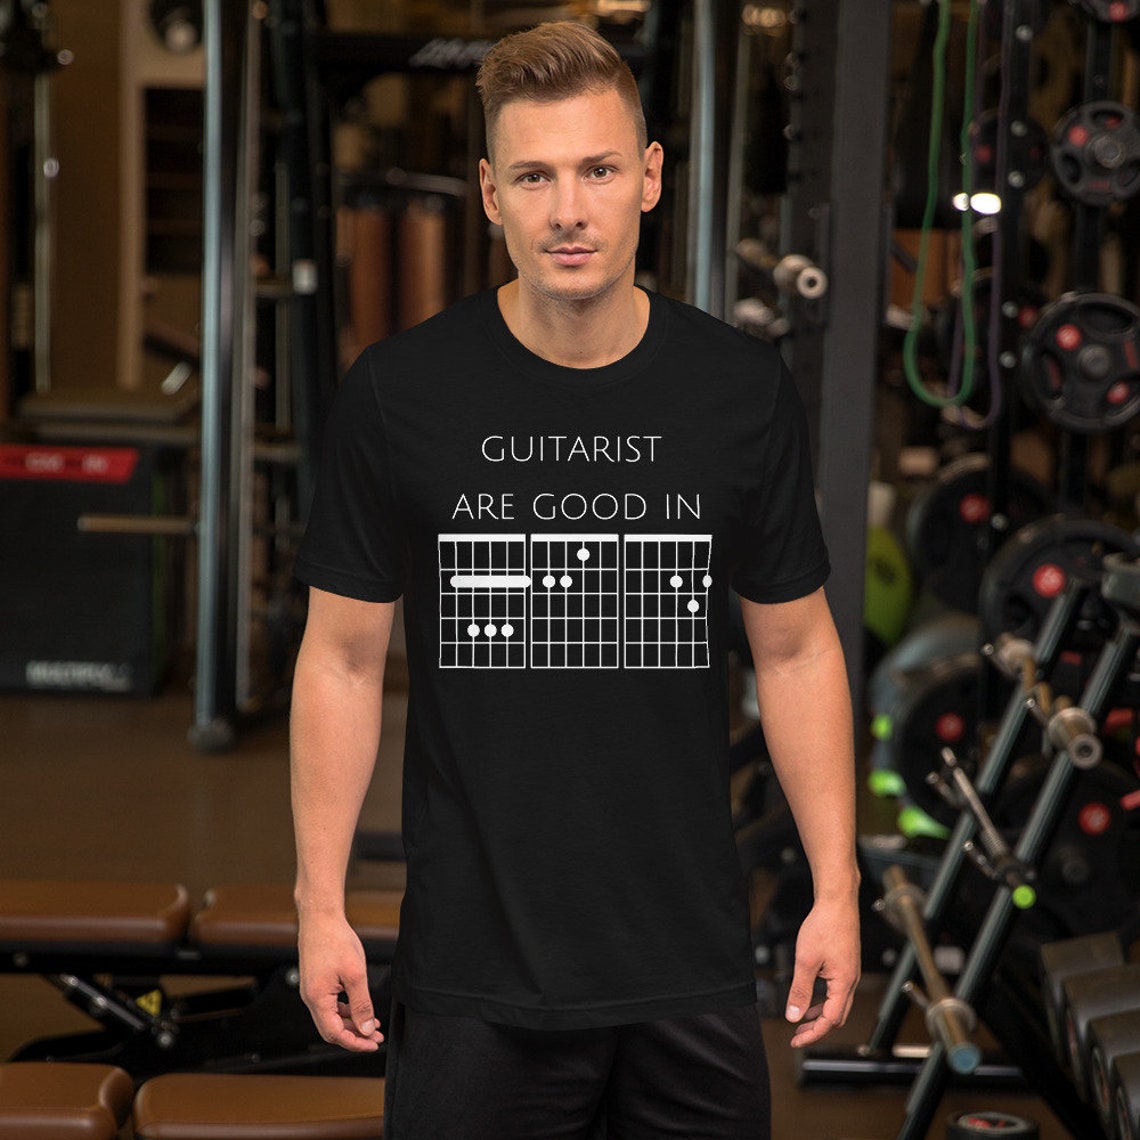 Guitarist Are Good in BED, Guitar T-shirt